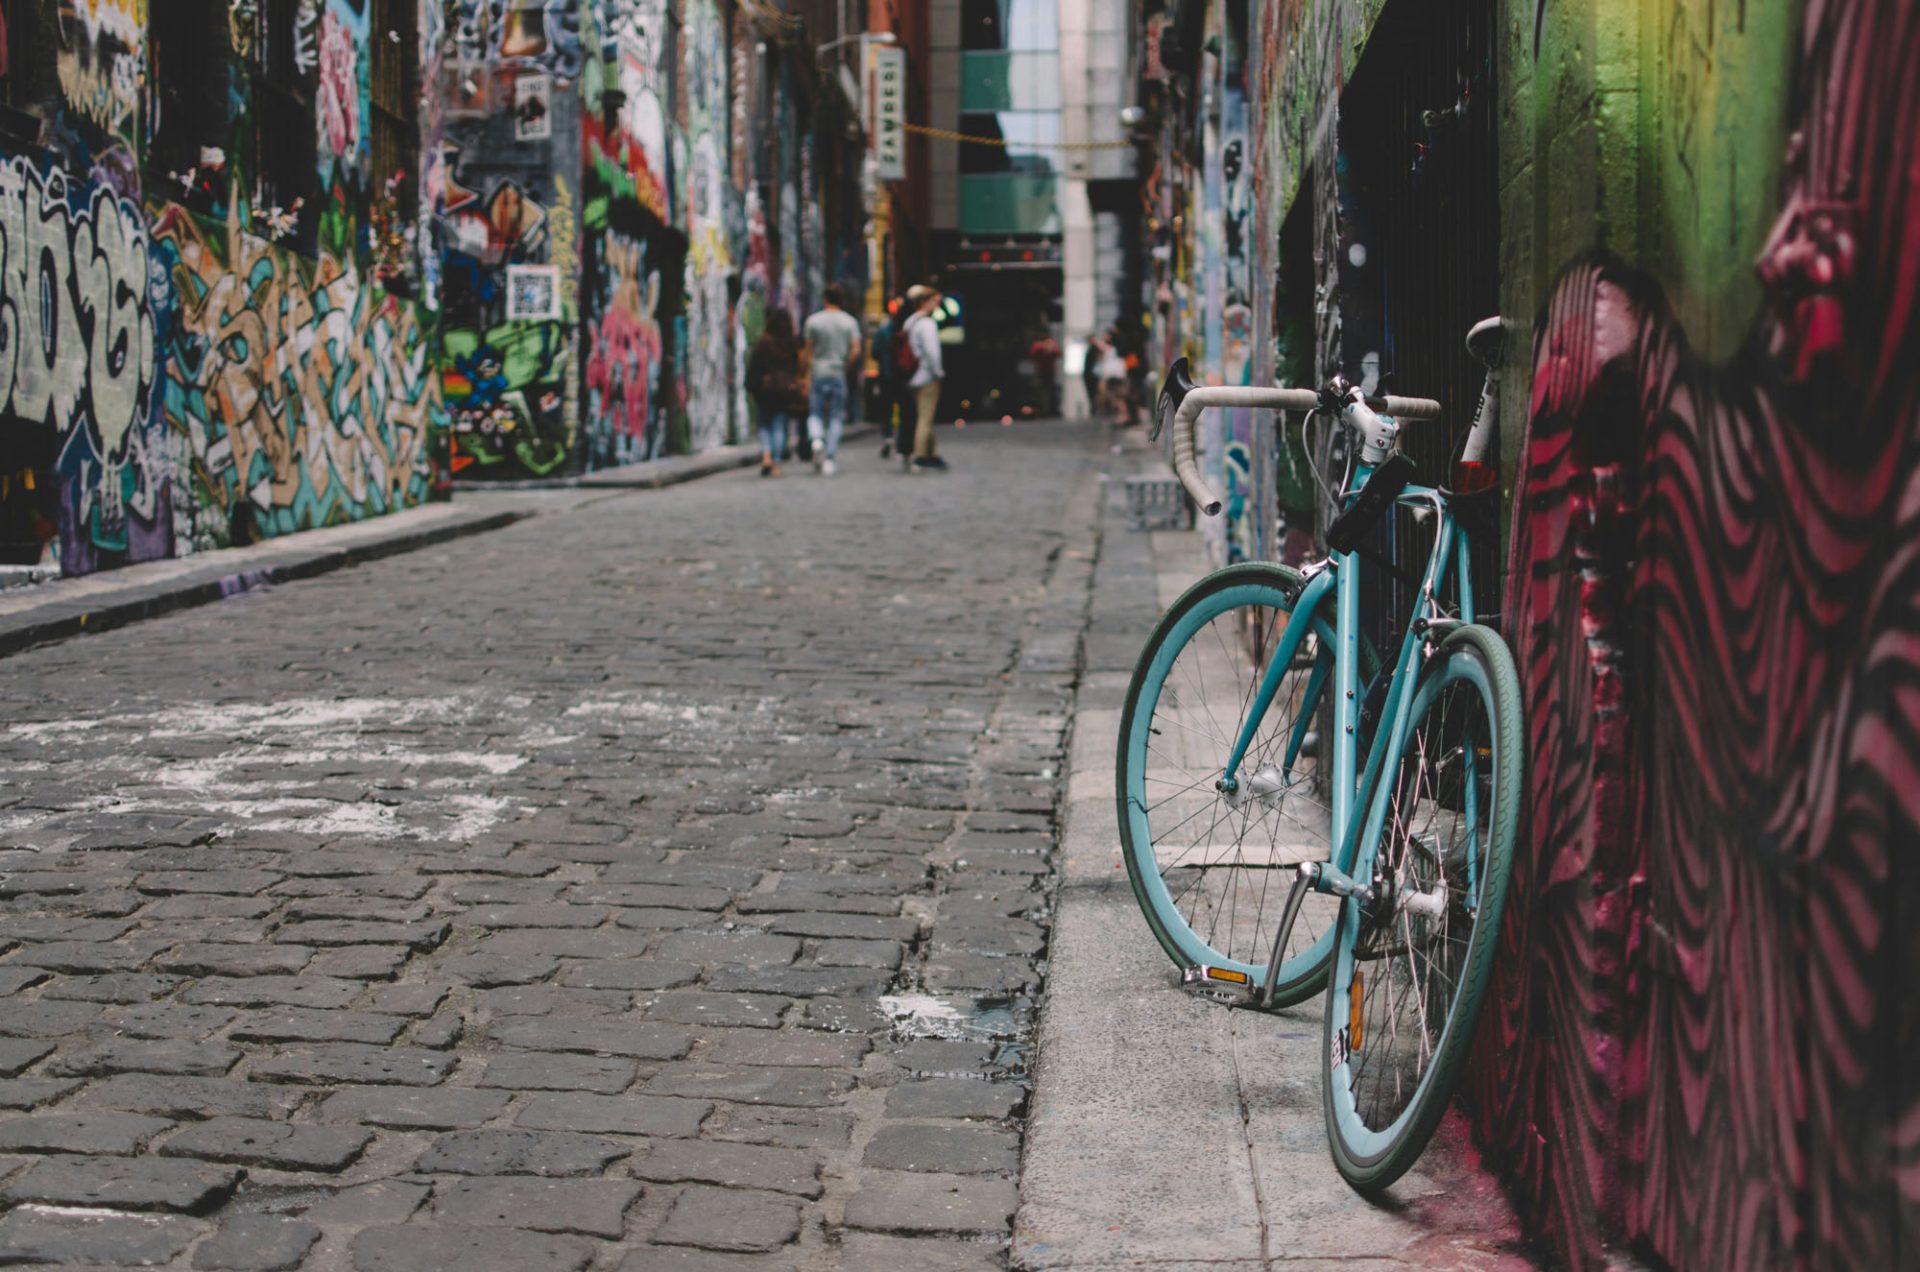 A light blue bicycle leans against a graffito'd wall in an alley in Melbourne. The alley is paved with bluestone cobbles, and the walls are covered in more brightly colored graffiti